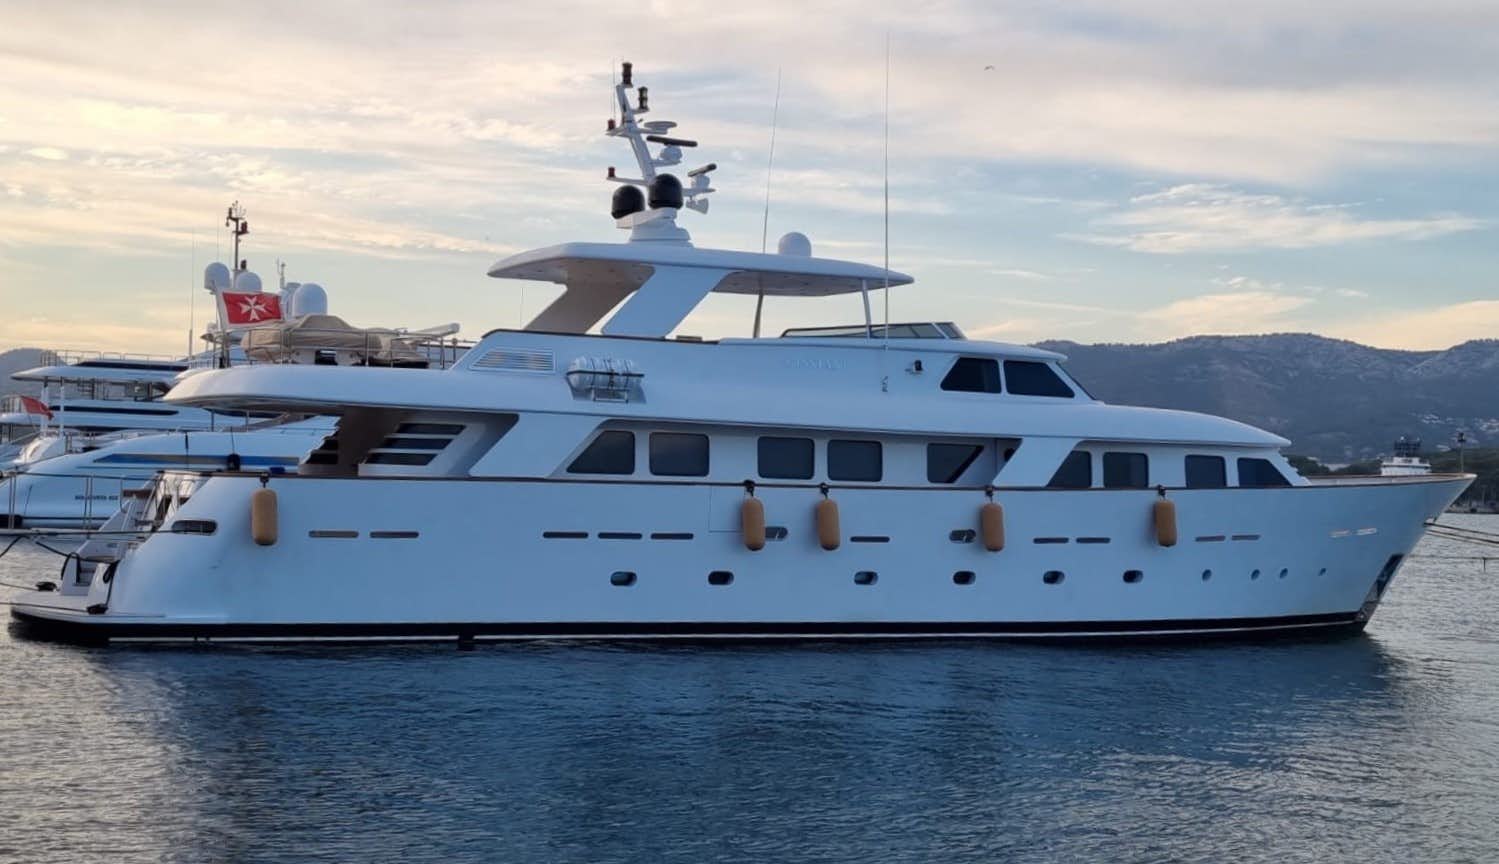 L'instant iv
Yacht for Sale